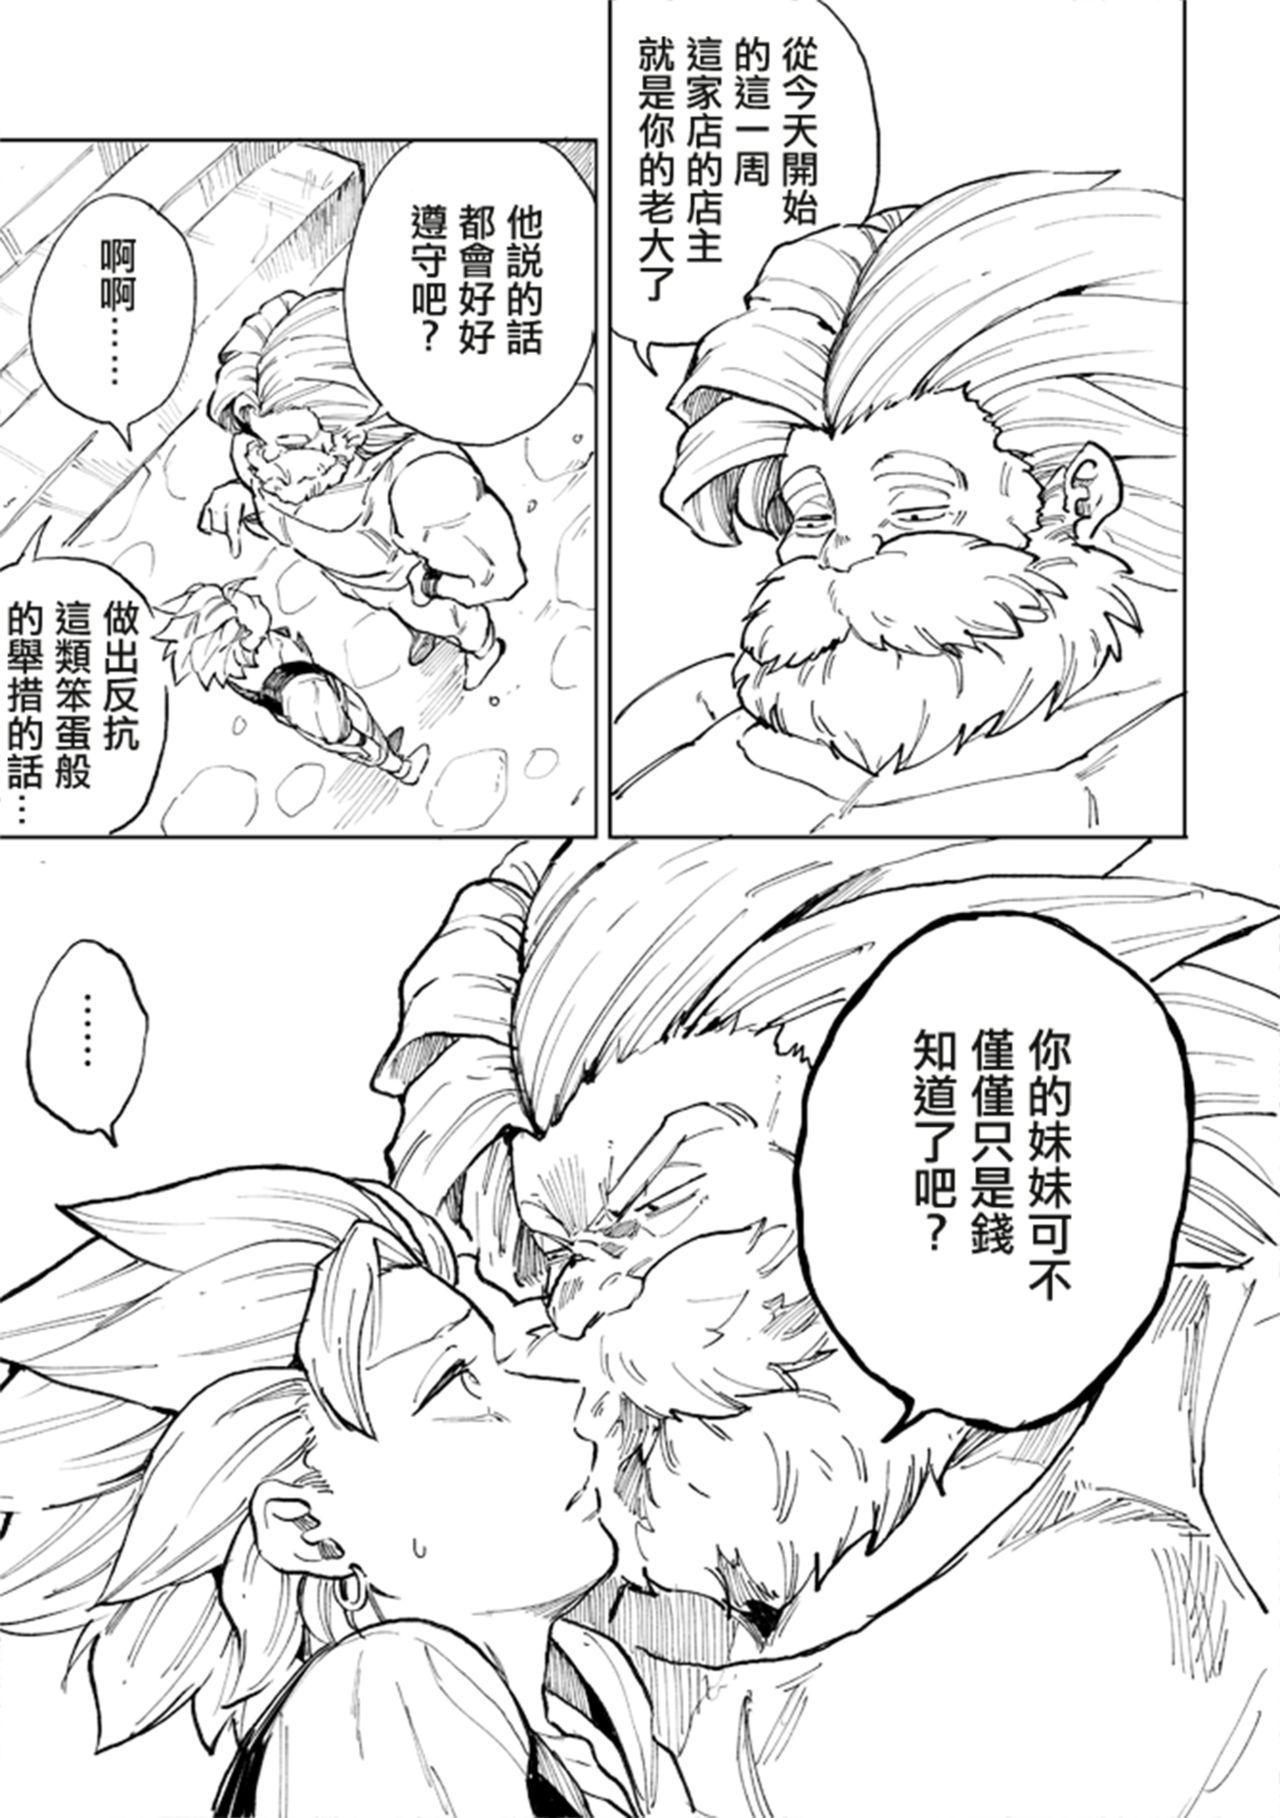 Office Rental Kamyu-kun 1 day - Dragon quest xi Cum On Face - Page 8